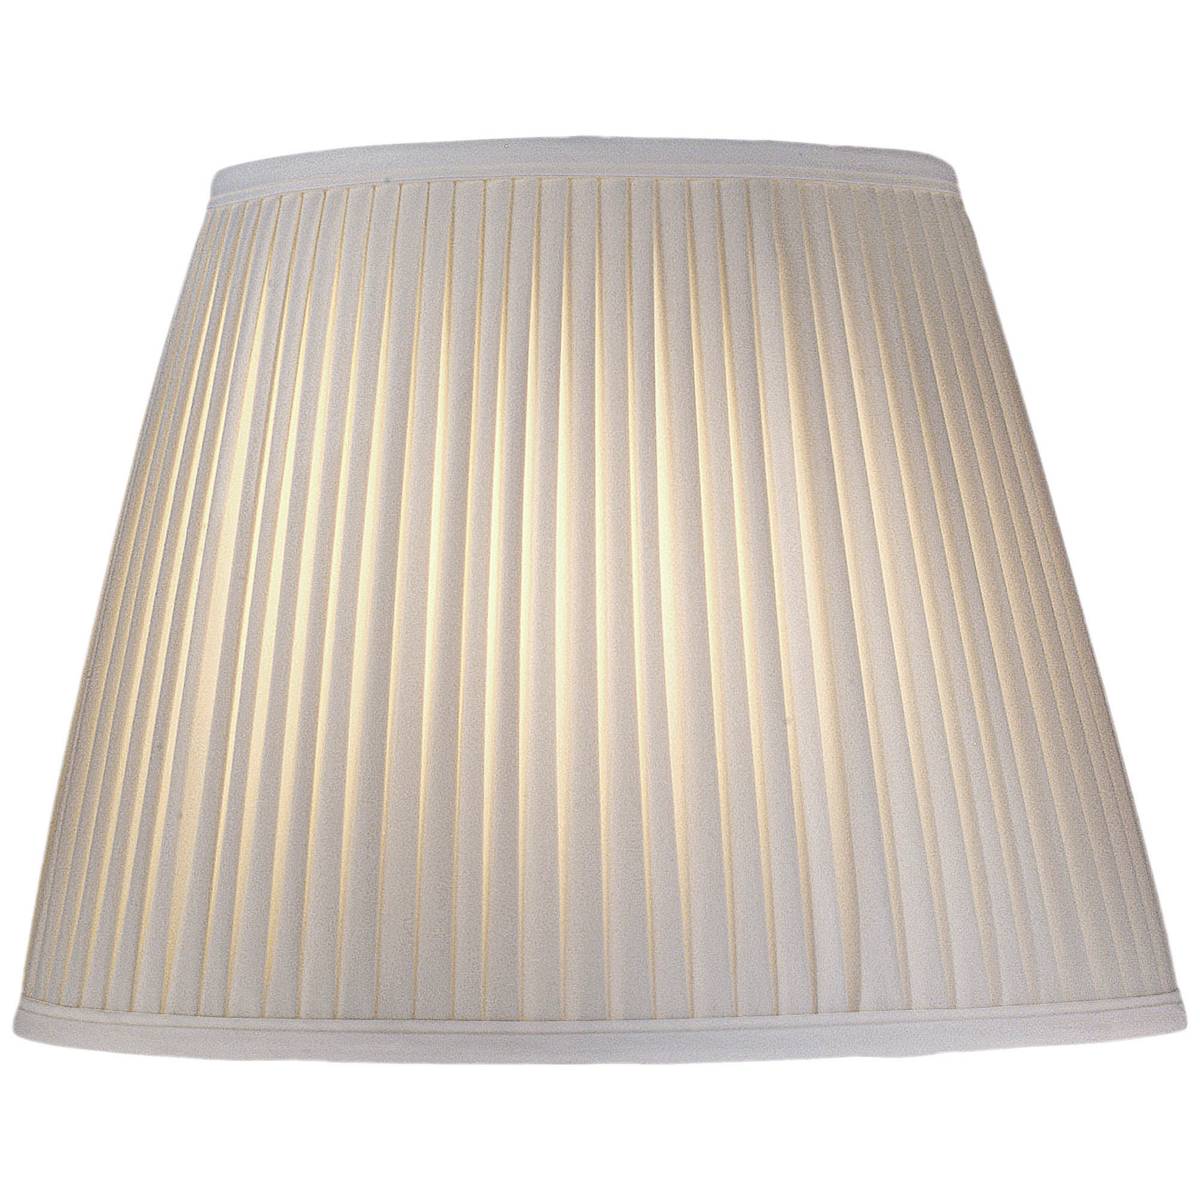 Stiffel Lamp Shades - Page 2 | Lamps Plus